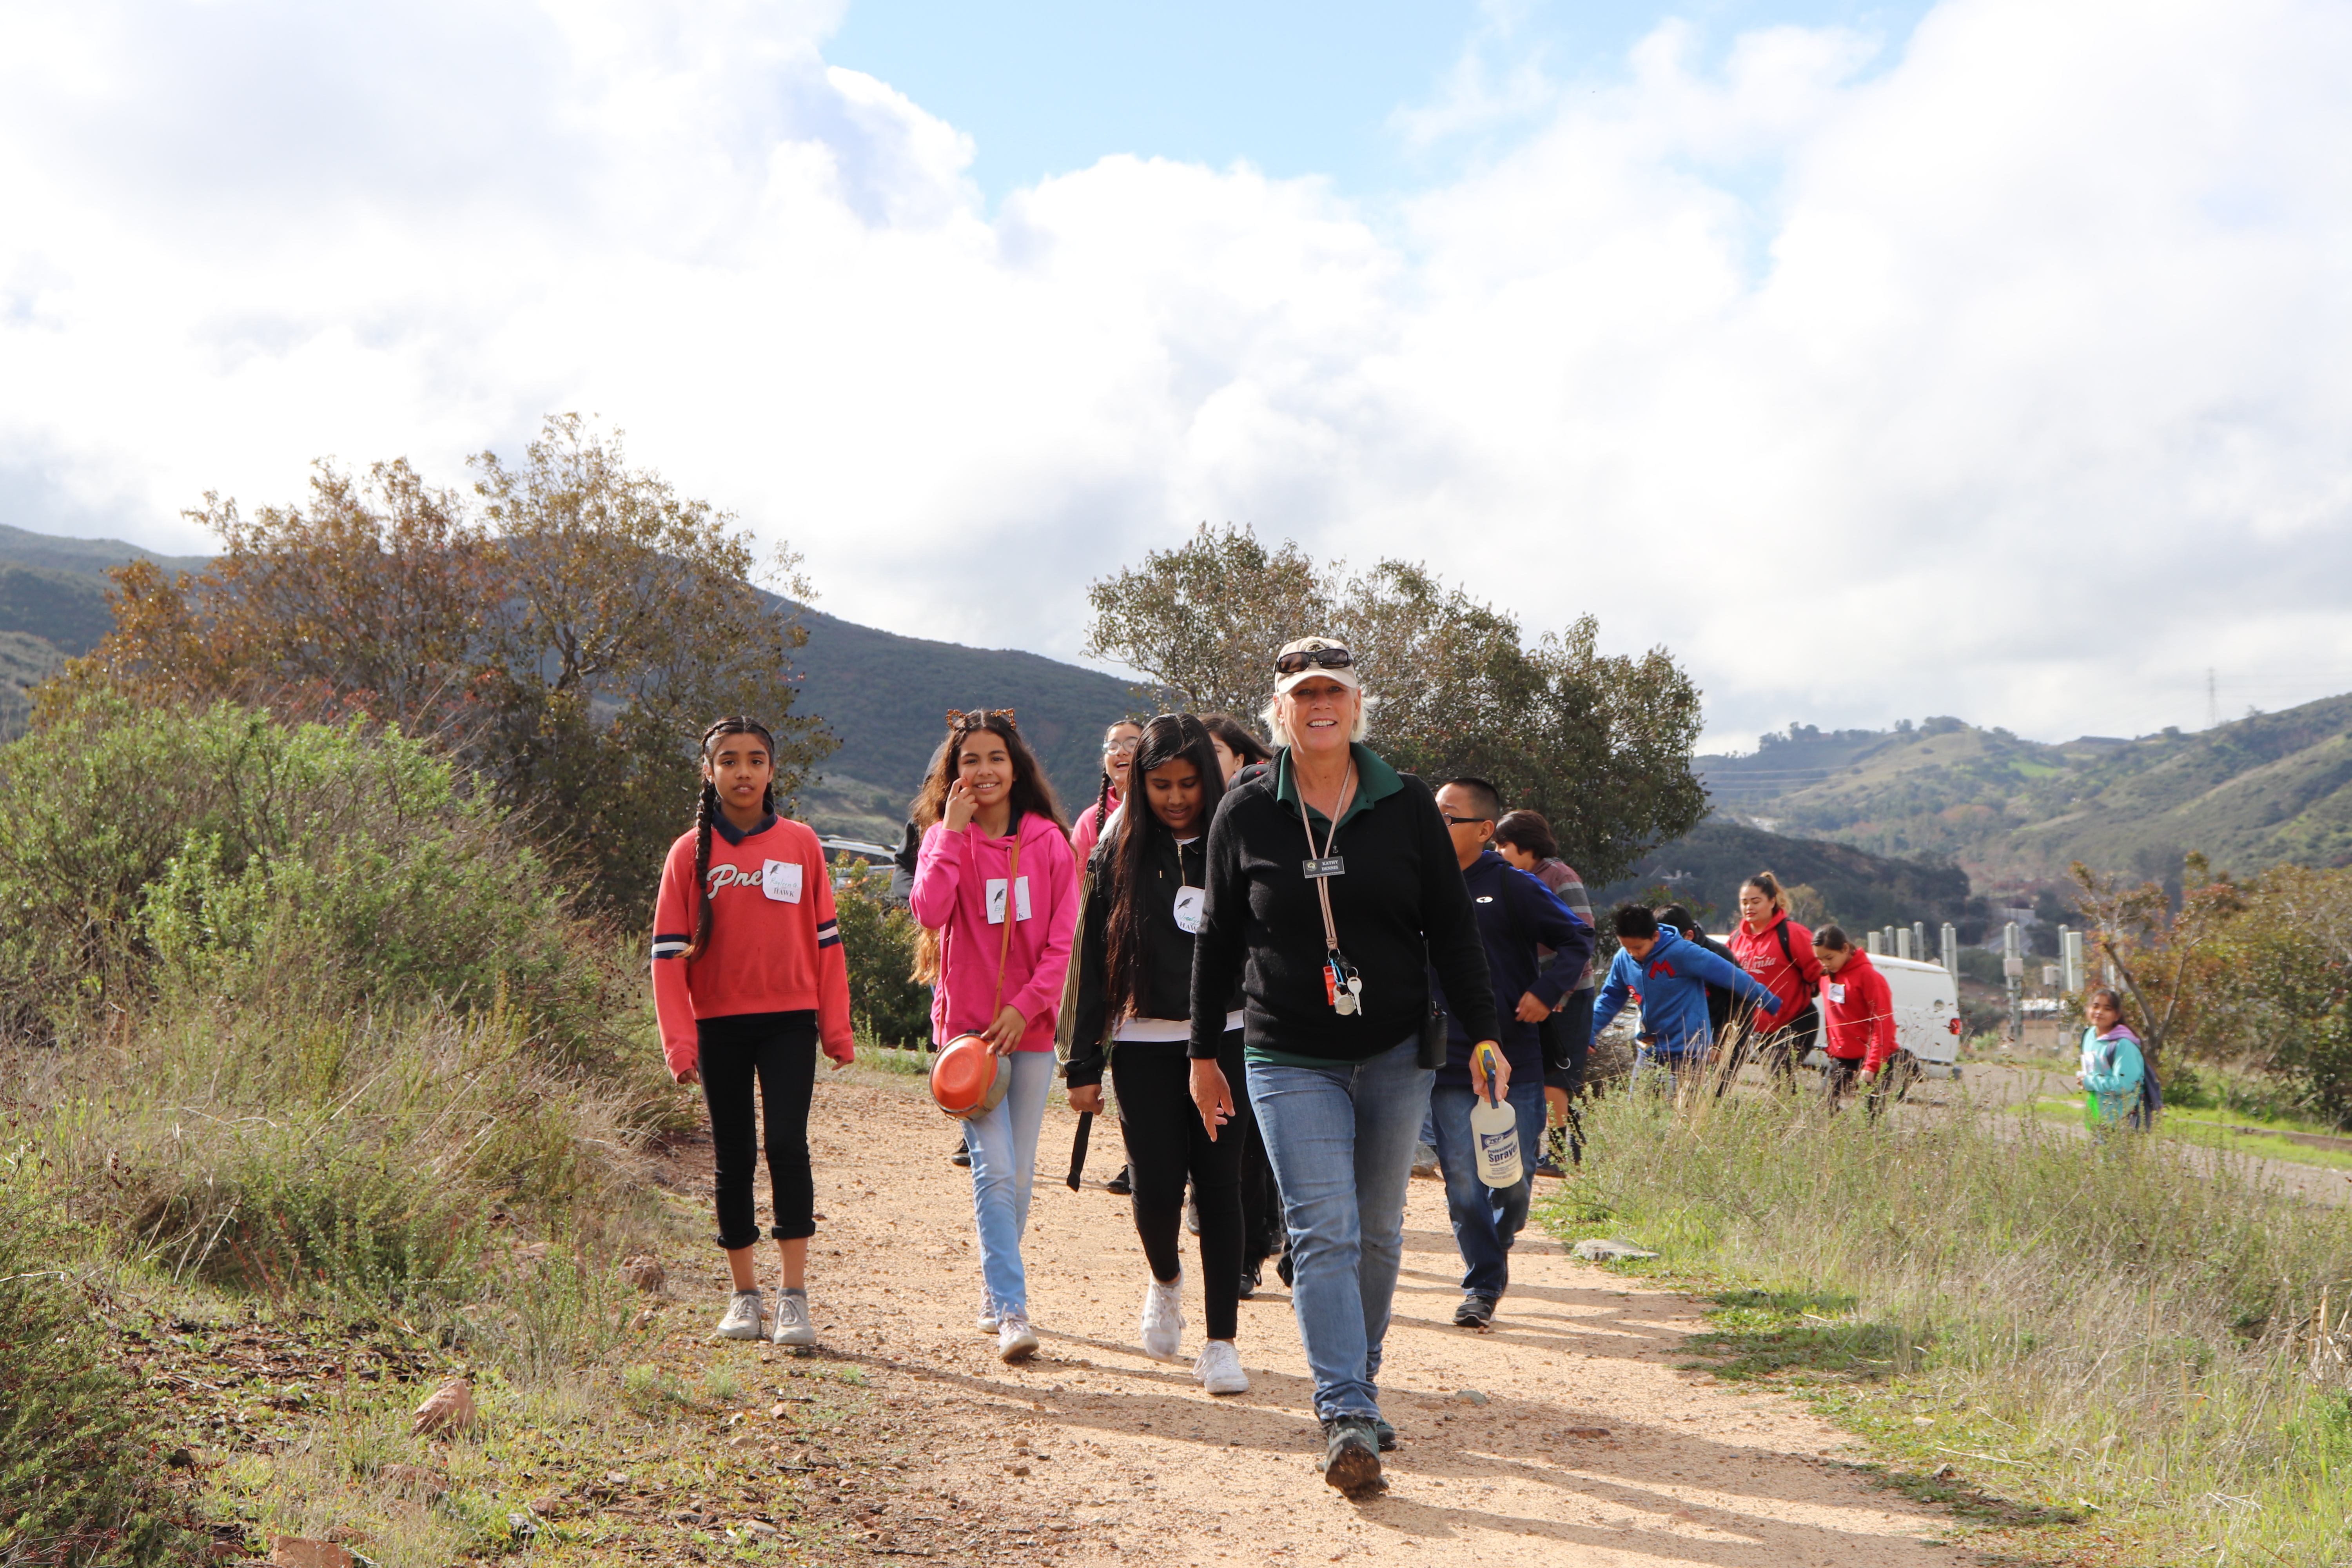 Naturalist walking with students in Chaparral